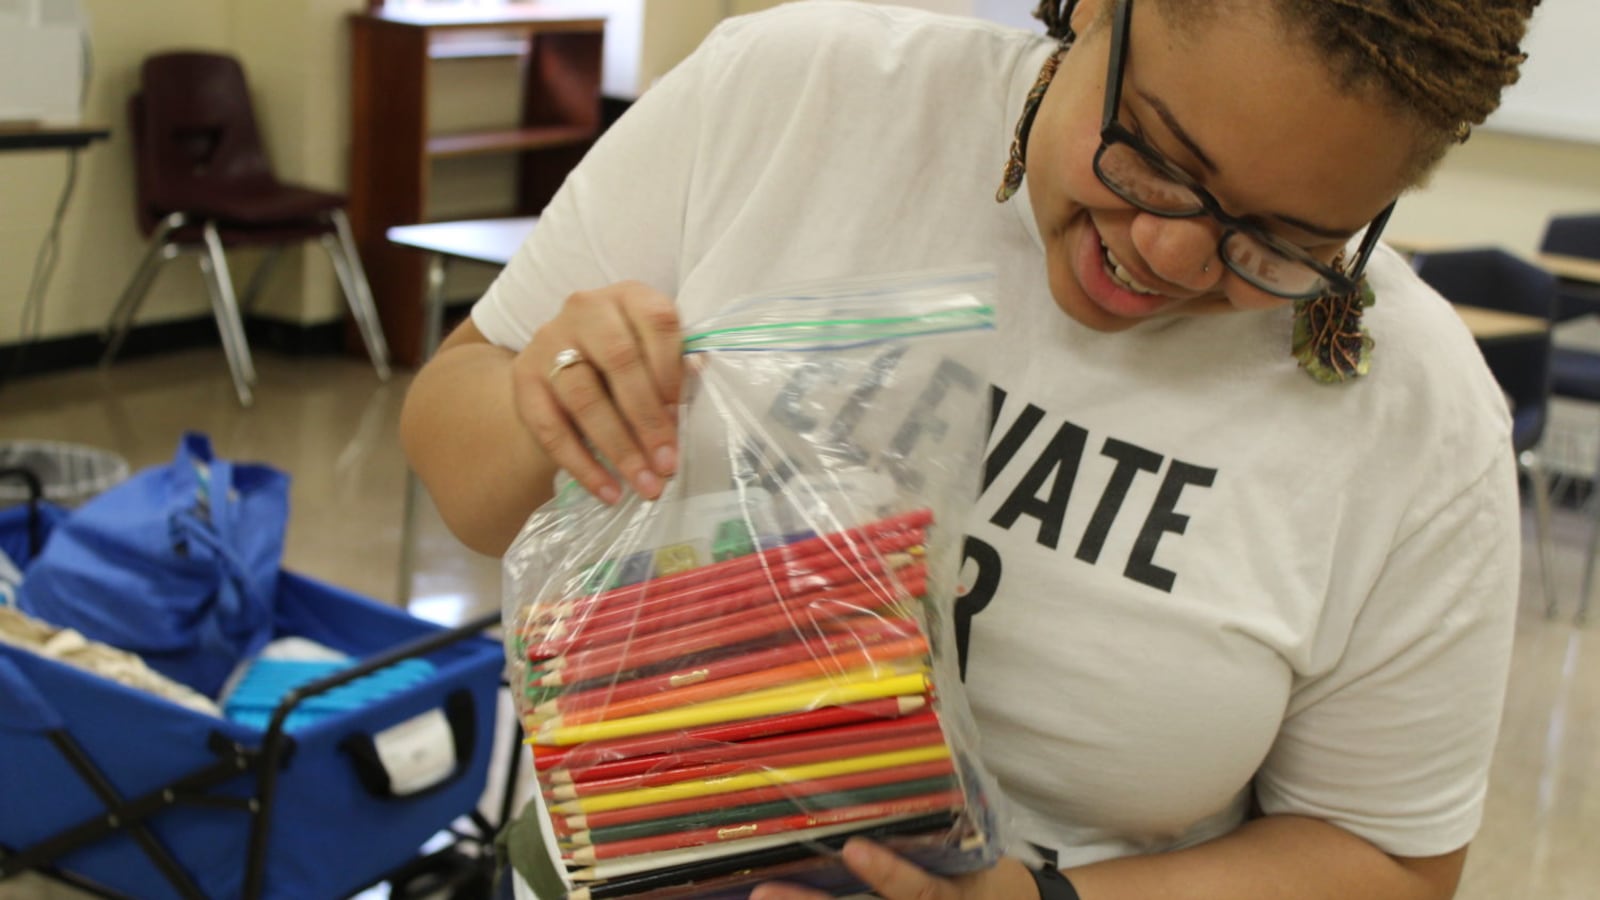 Shemena Shivers, a ninth grade science teacher at Melrose High School, smiles as she opens a package from a friend in Arizona. Through social media, Shivers has raised $1600 for her classroom.